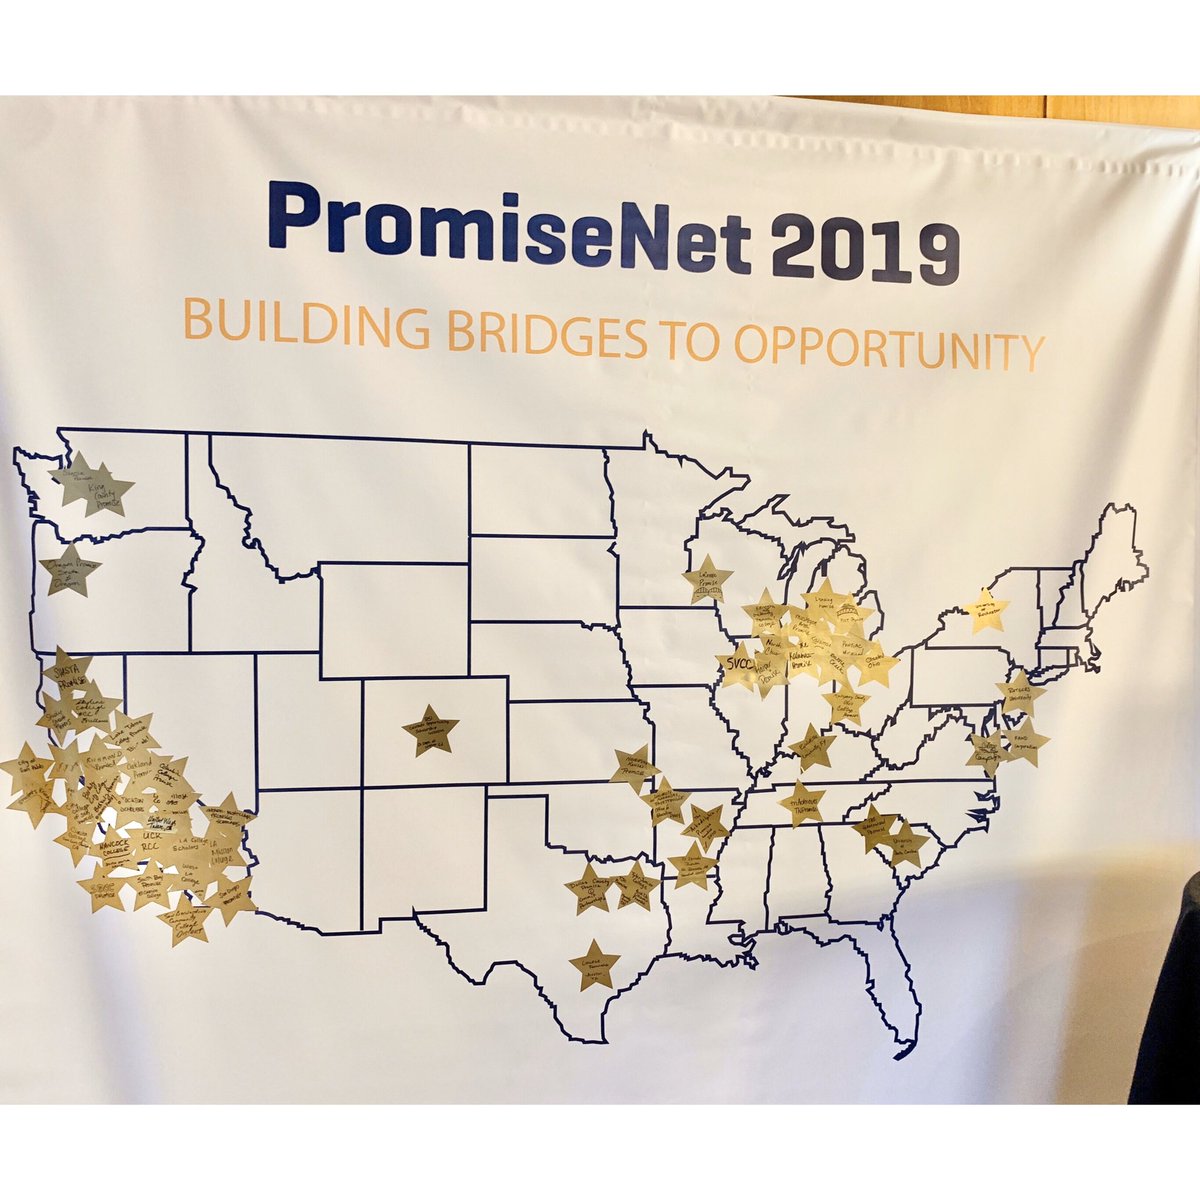 Energized by #PromiseNet2019 surrounded by pioneers for #CollegePromise. The movement is on the rise with more than 320 promise programs nationally 📈
#Bridge2opportunity